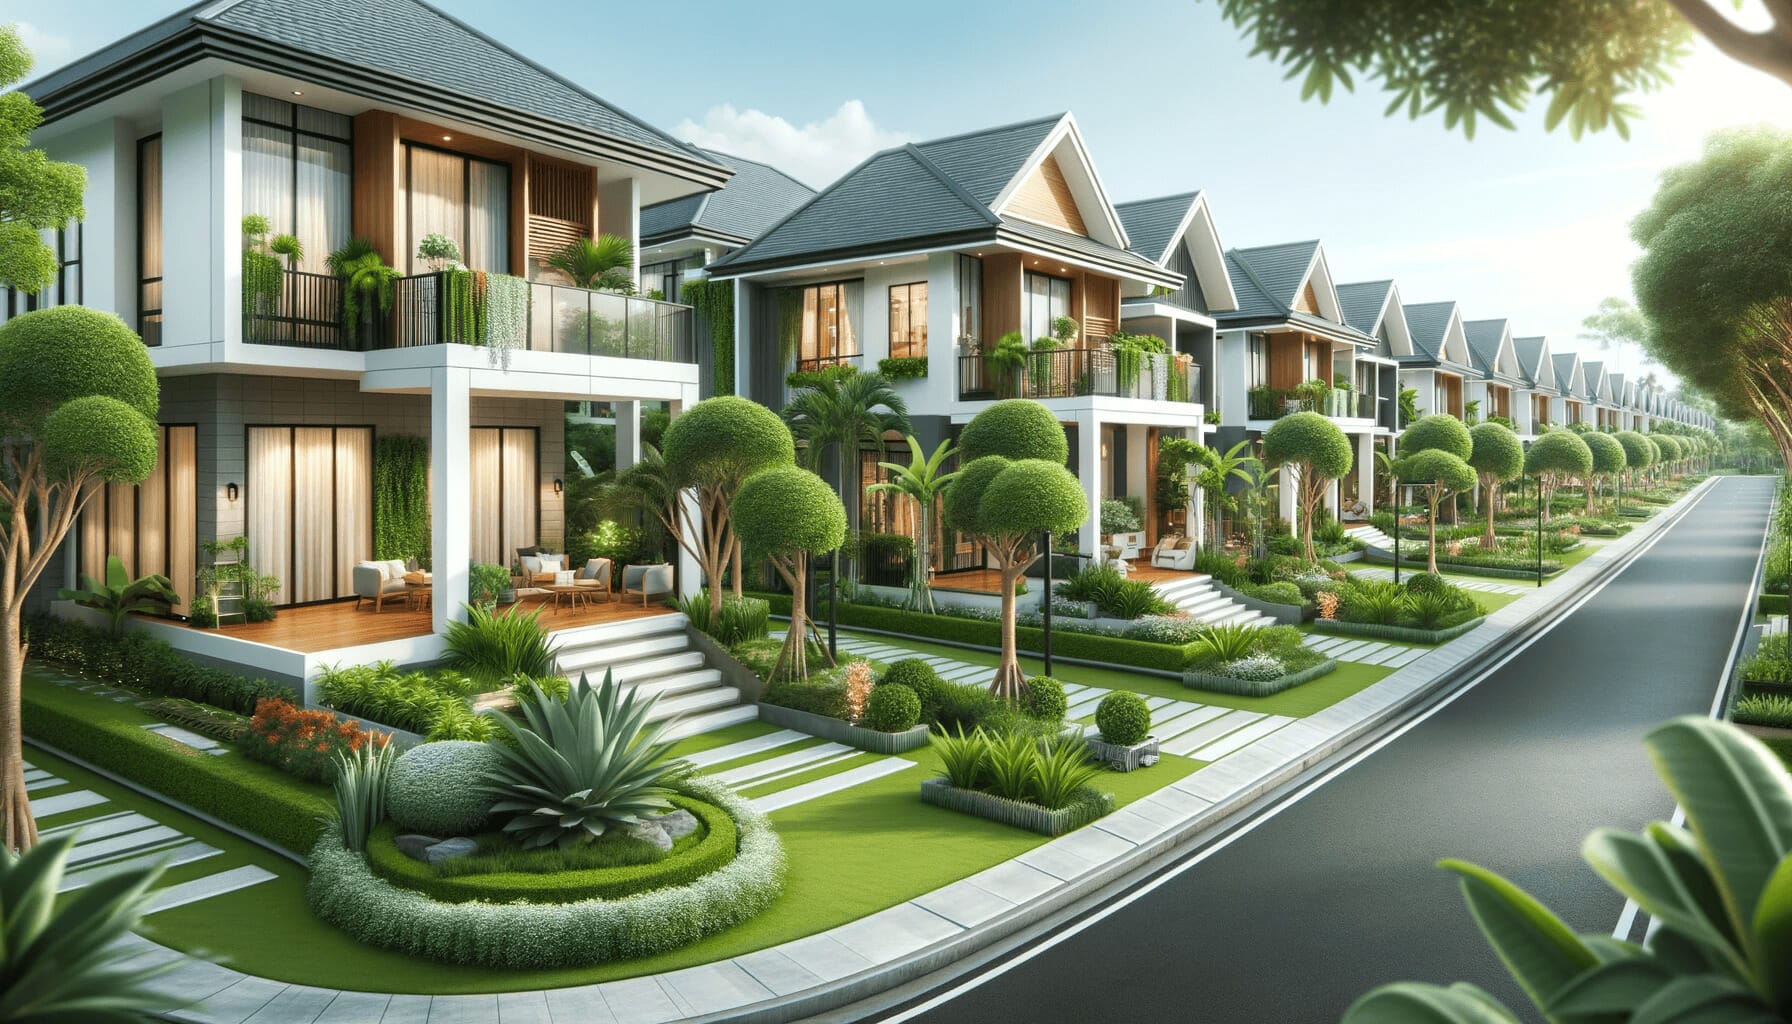 DALL·E 2023 10 16 16.54.28 Photo of a stylish new housing development showcasing various house designs with greenery around